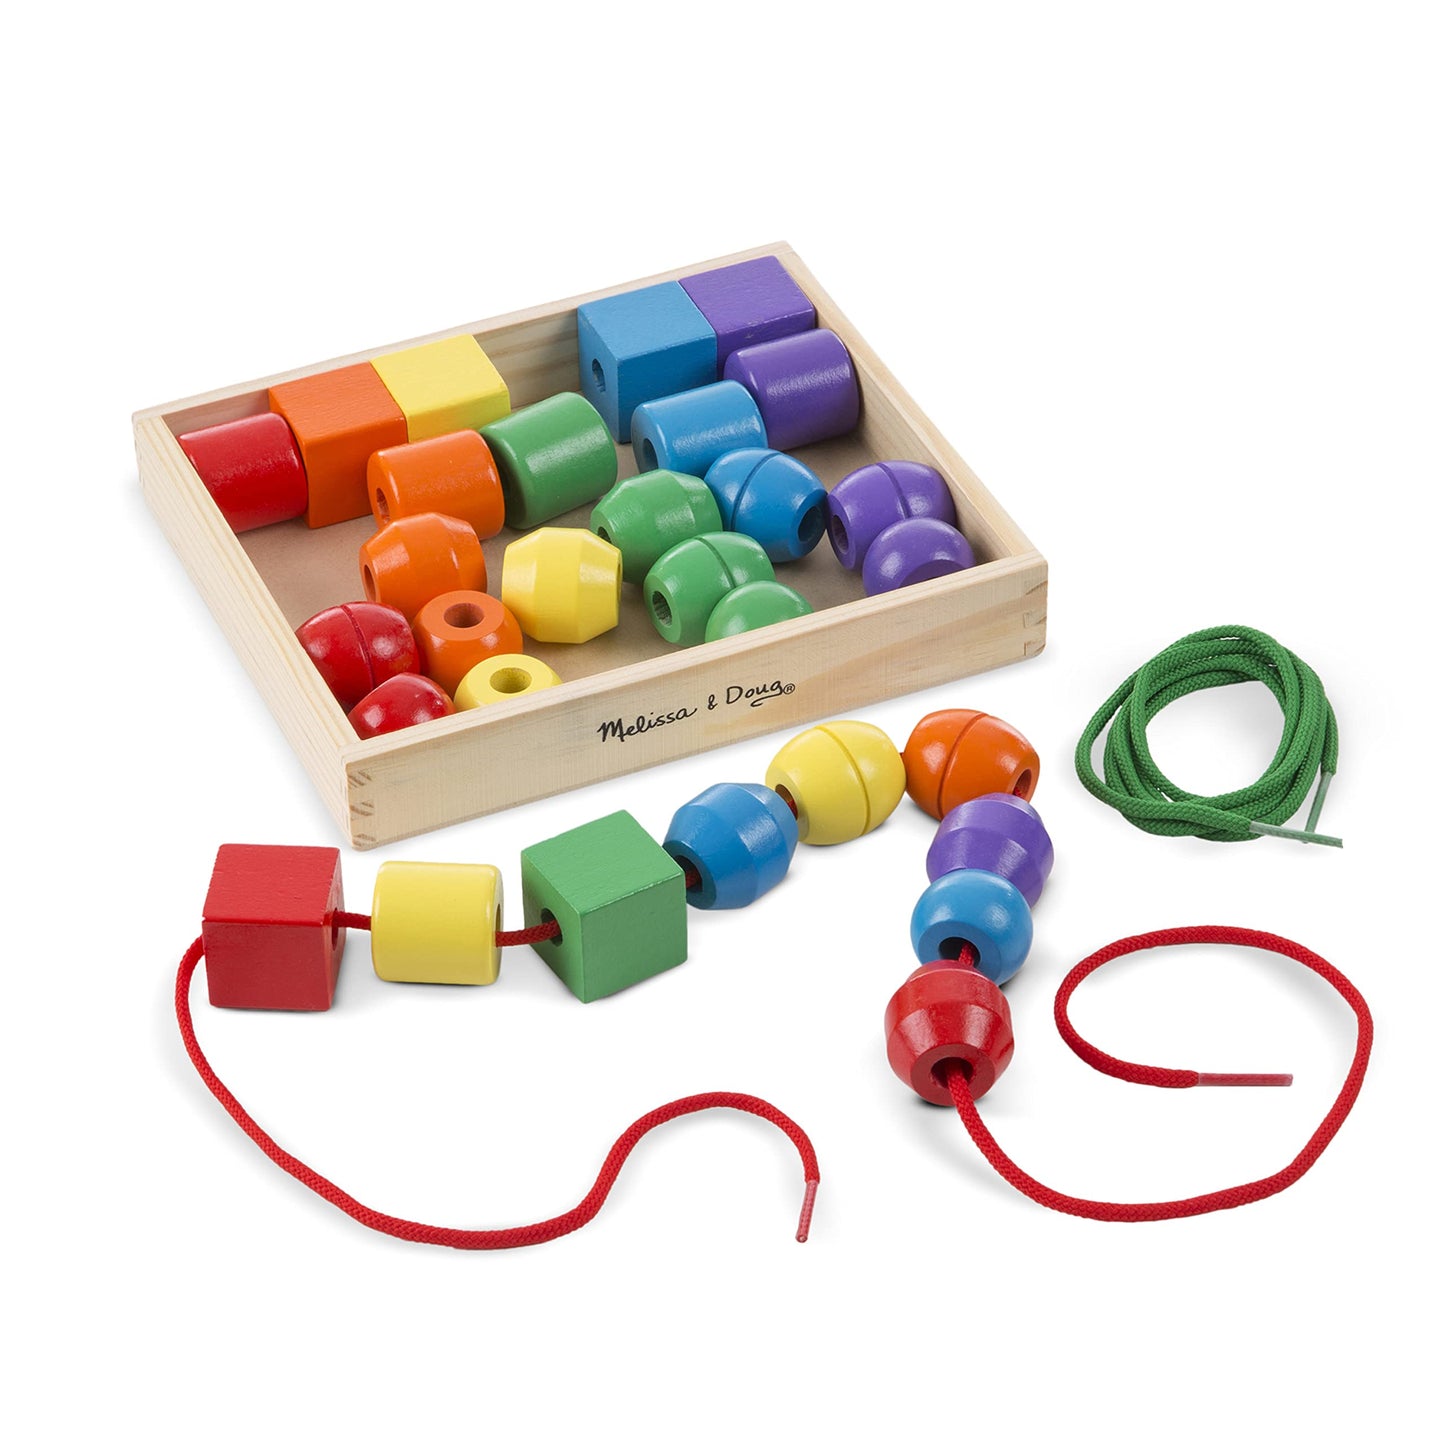 Melissa & Doug Primary Lacing Beads - Educational Toy With 30 Wooden Beads and 2 Laces - Beads For Toddlers, Fine Motor Skills Lacing Toys For Toddlers And Kids Ages 3+